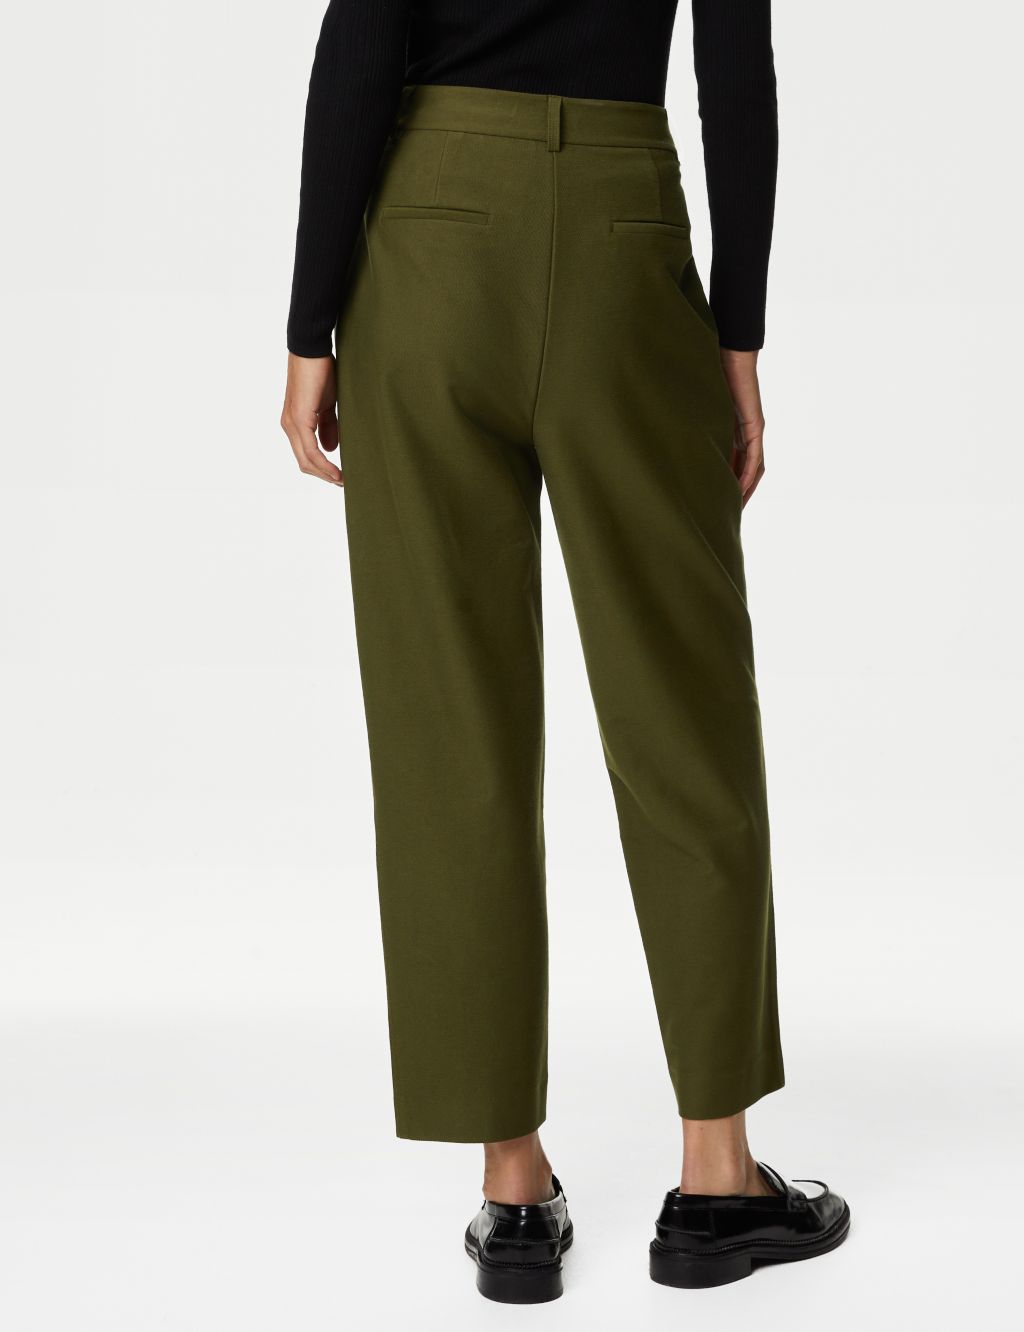 Jersey Tapered Ankle Grazer Trousers image 5